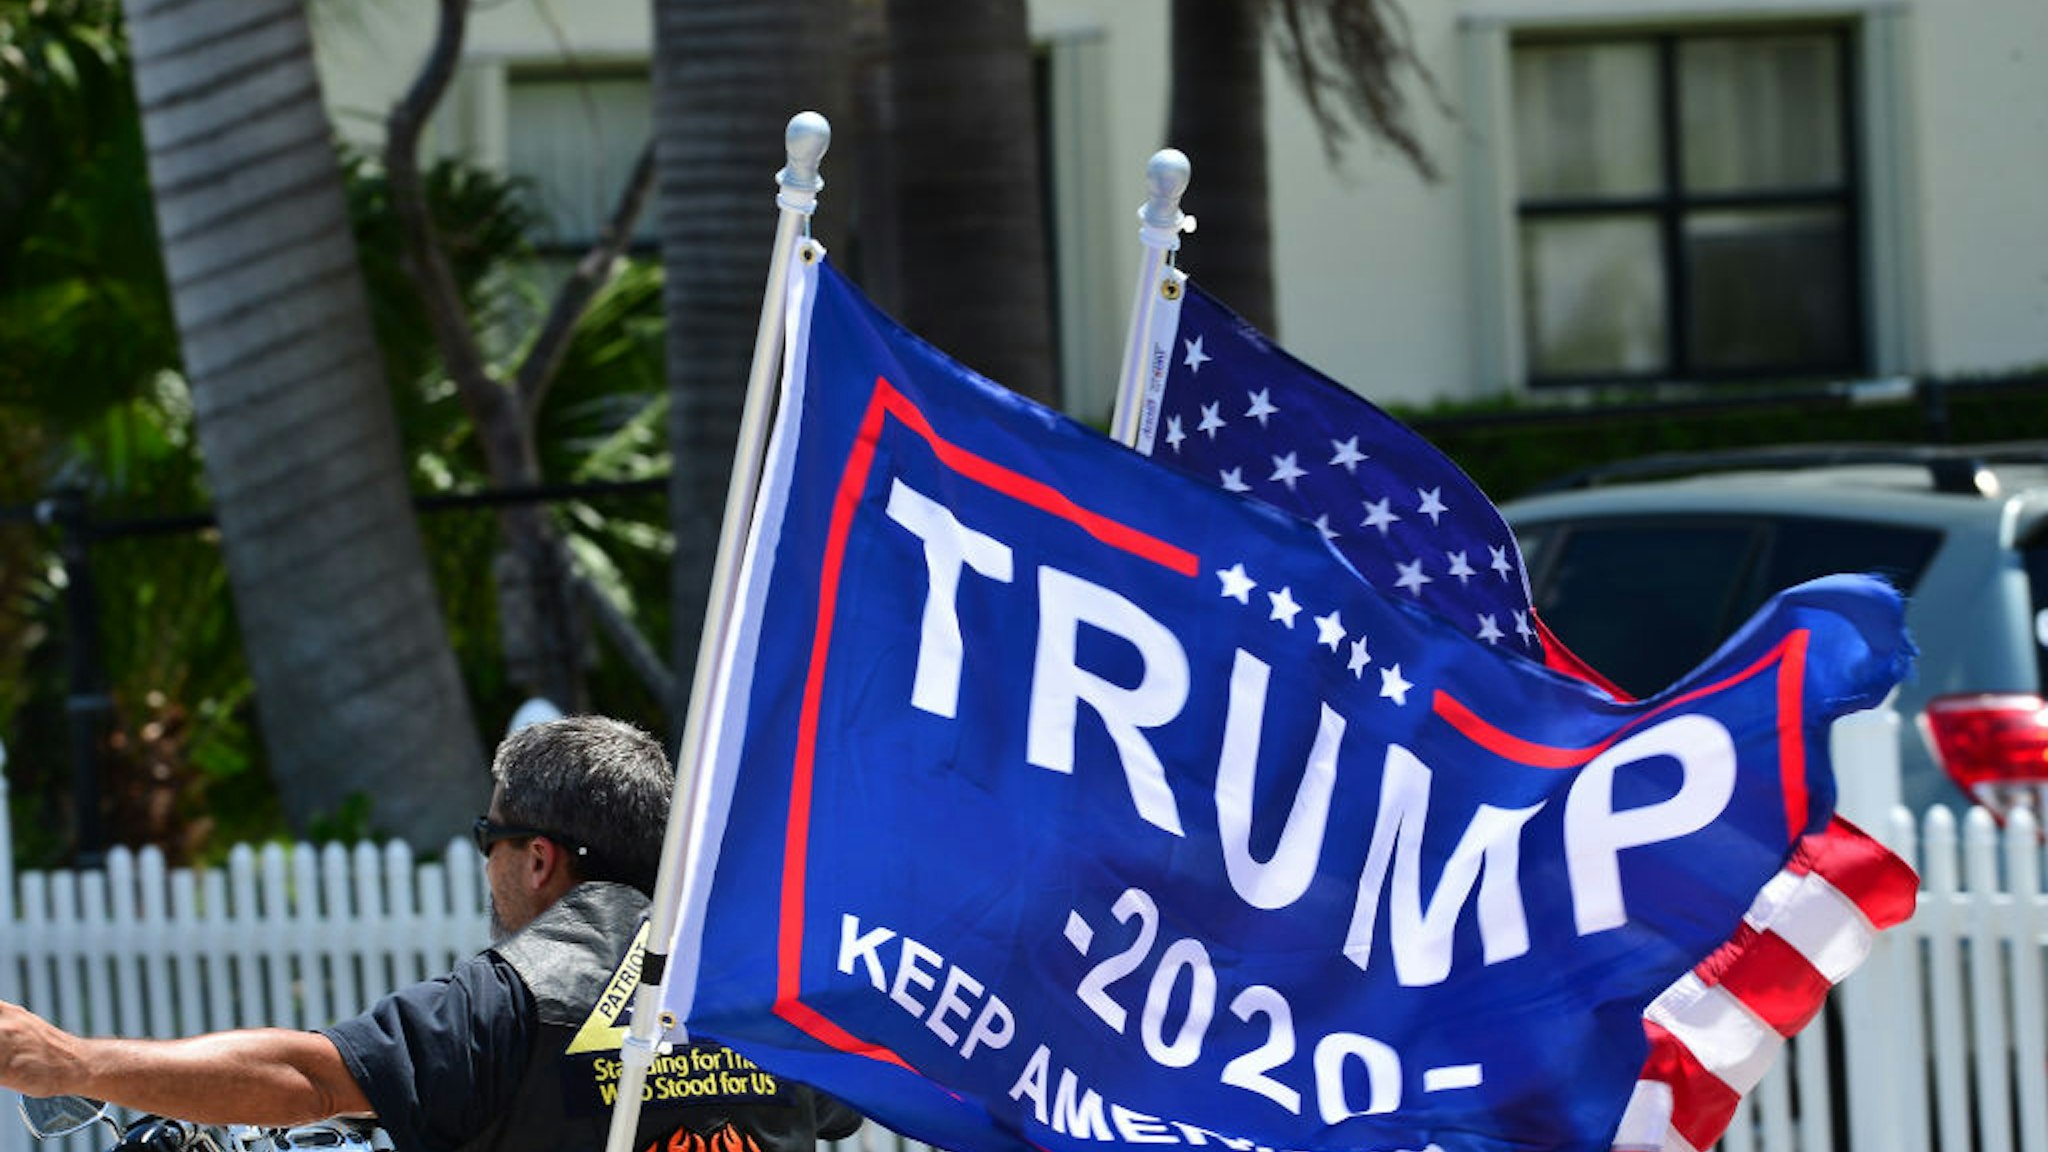 Supporters of President Donald Trump wave their flags as a Flotilla of Boaters sail by on inter-coastal waterways at Mar-a-Lago to mark the President's 75th birthday on June 14, 2020 in Palm Beach, Florida.